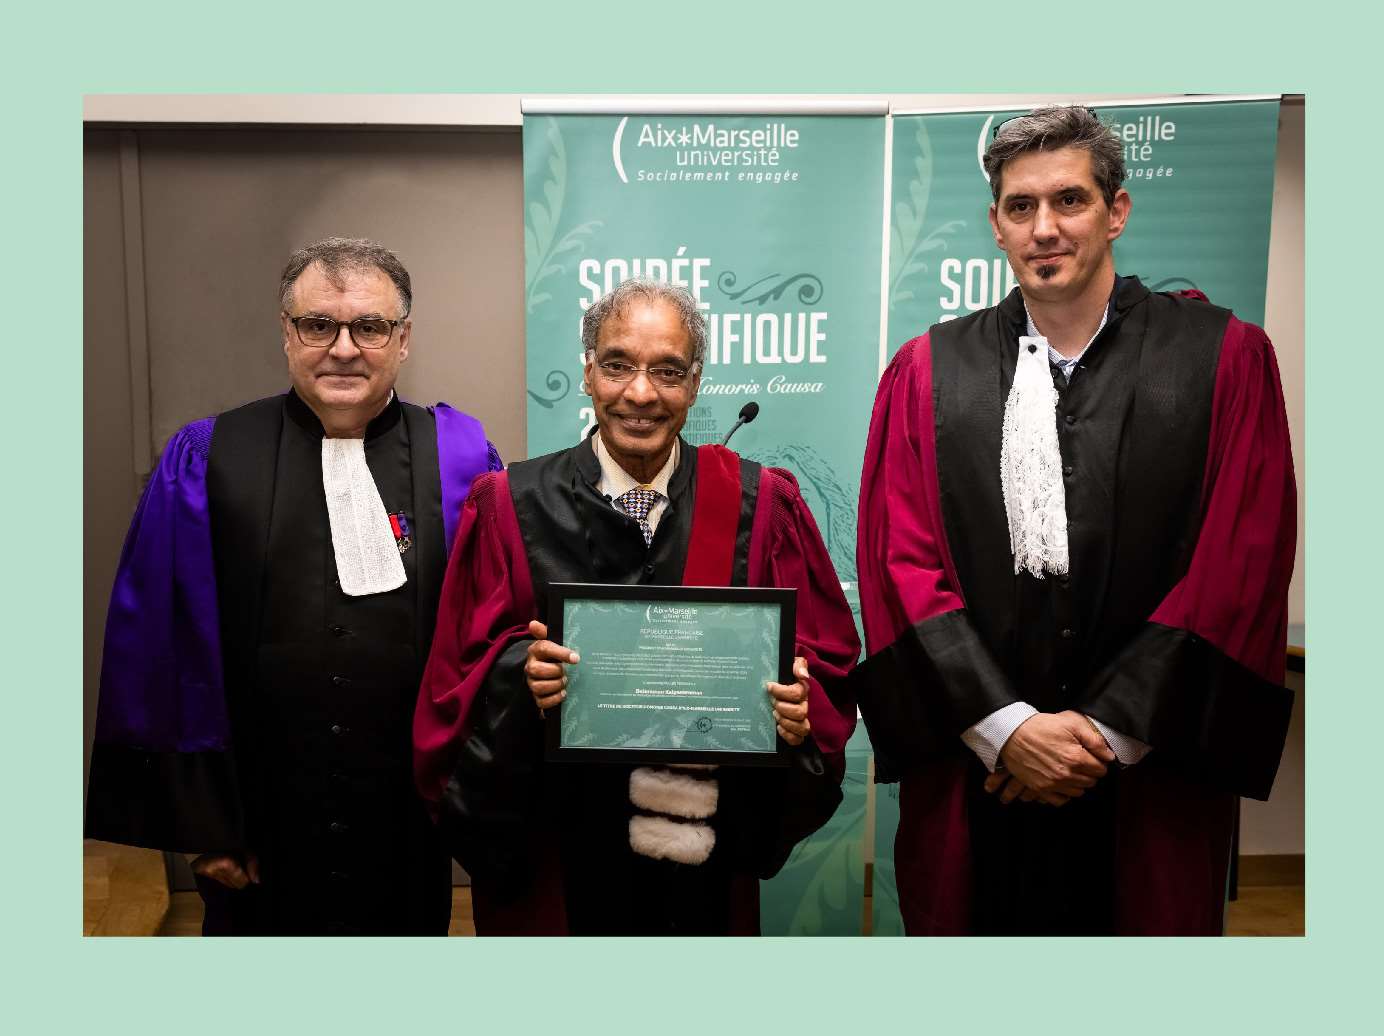 Dr. Kalyanaraman receiving an honorary degree from two individuals at Aix-Marseille University